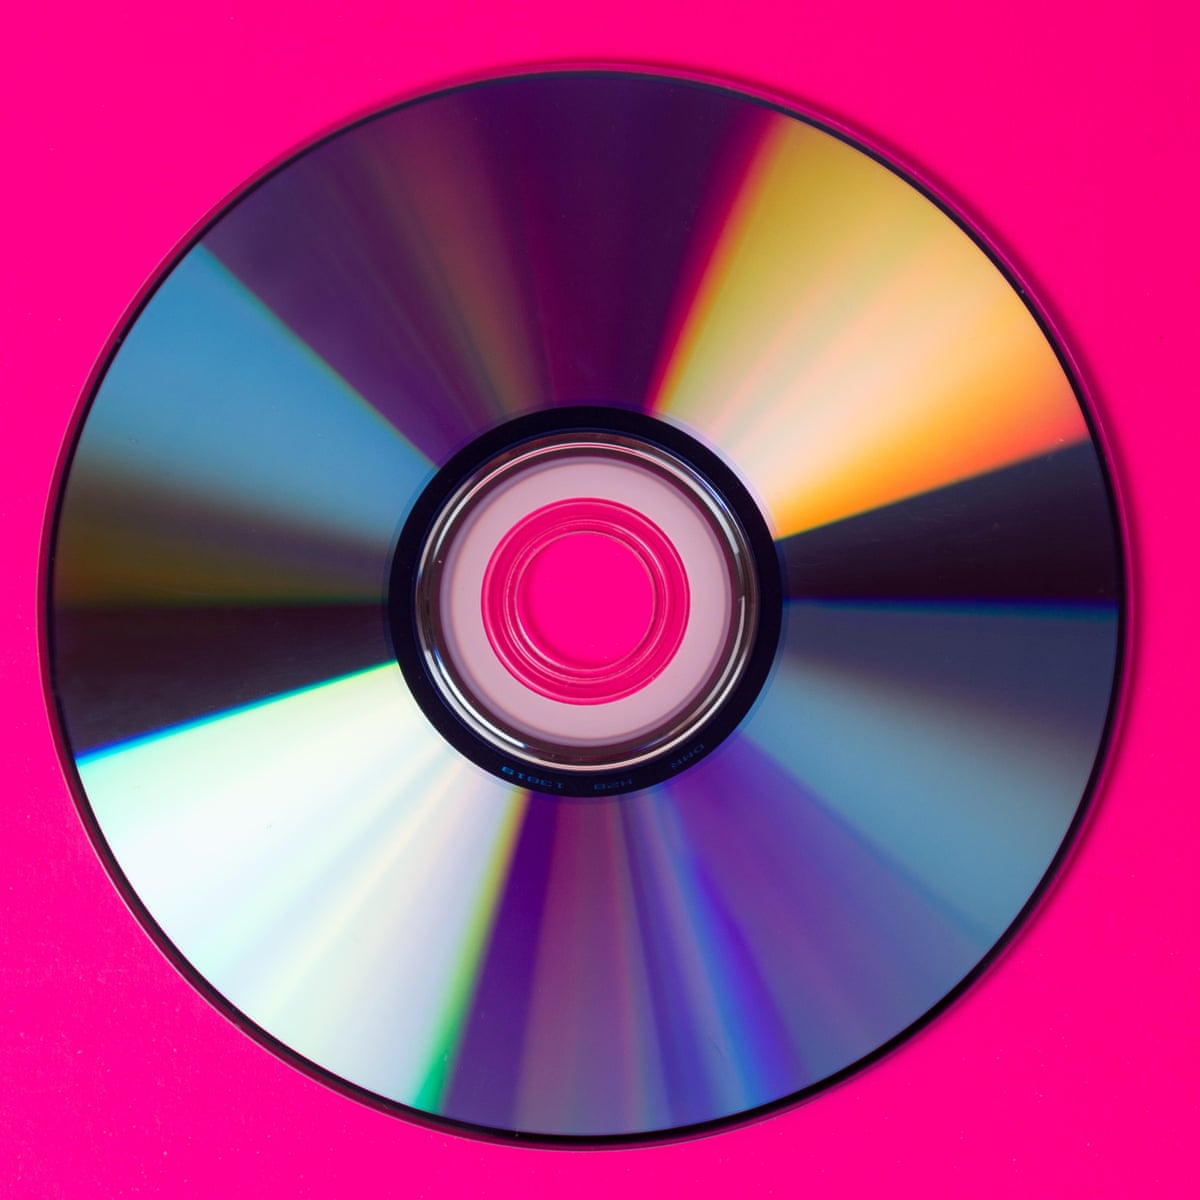 Hipster kryptonite': will CDs ever have a resurgence?, Music